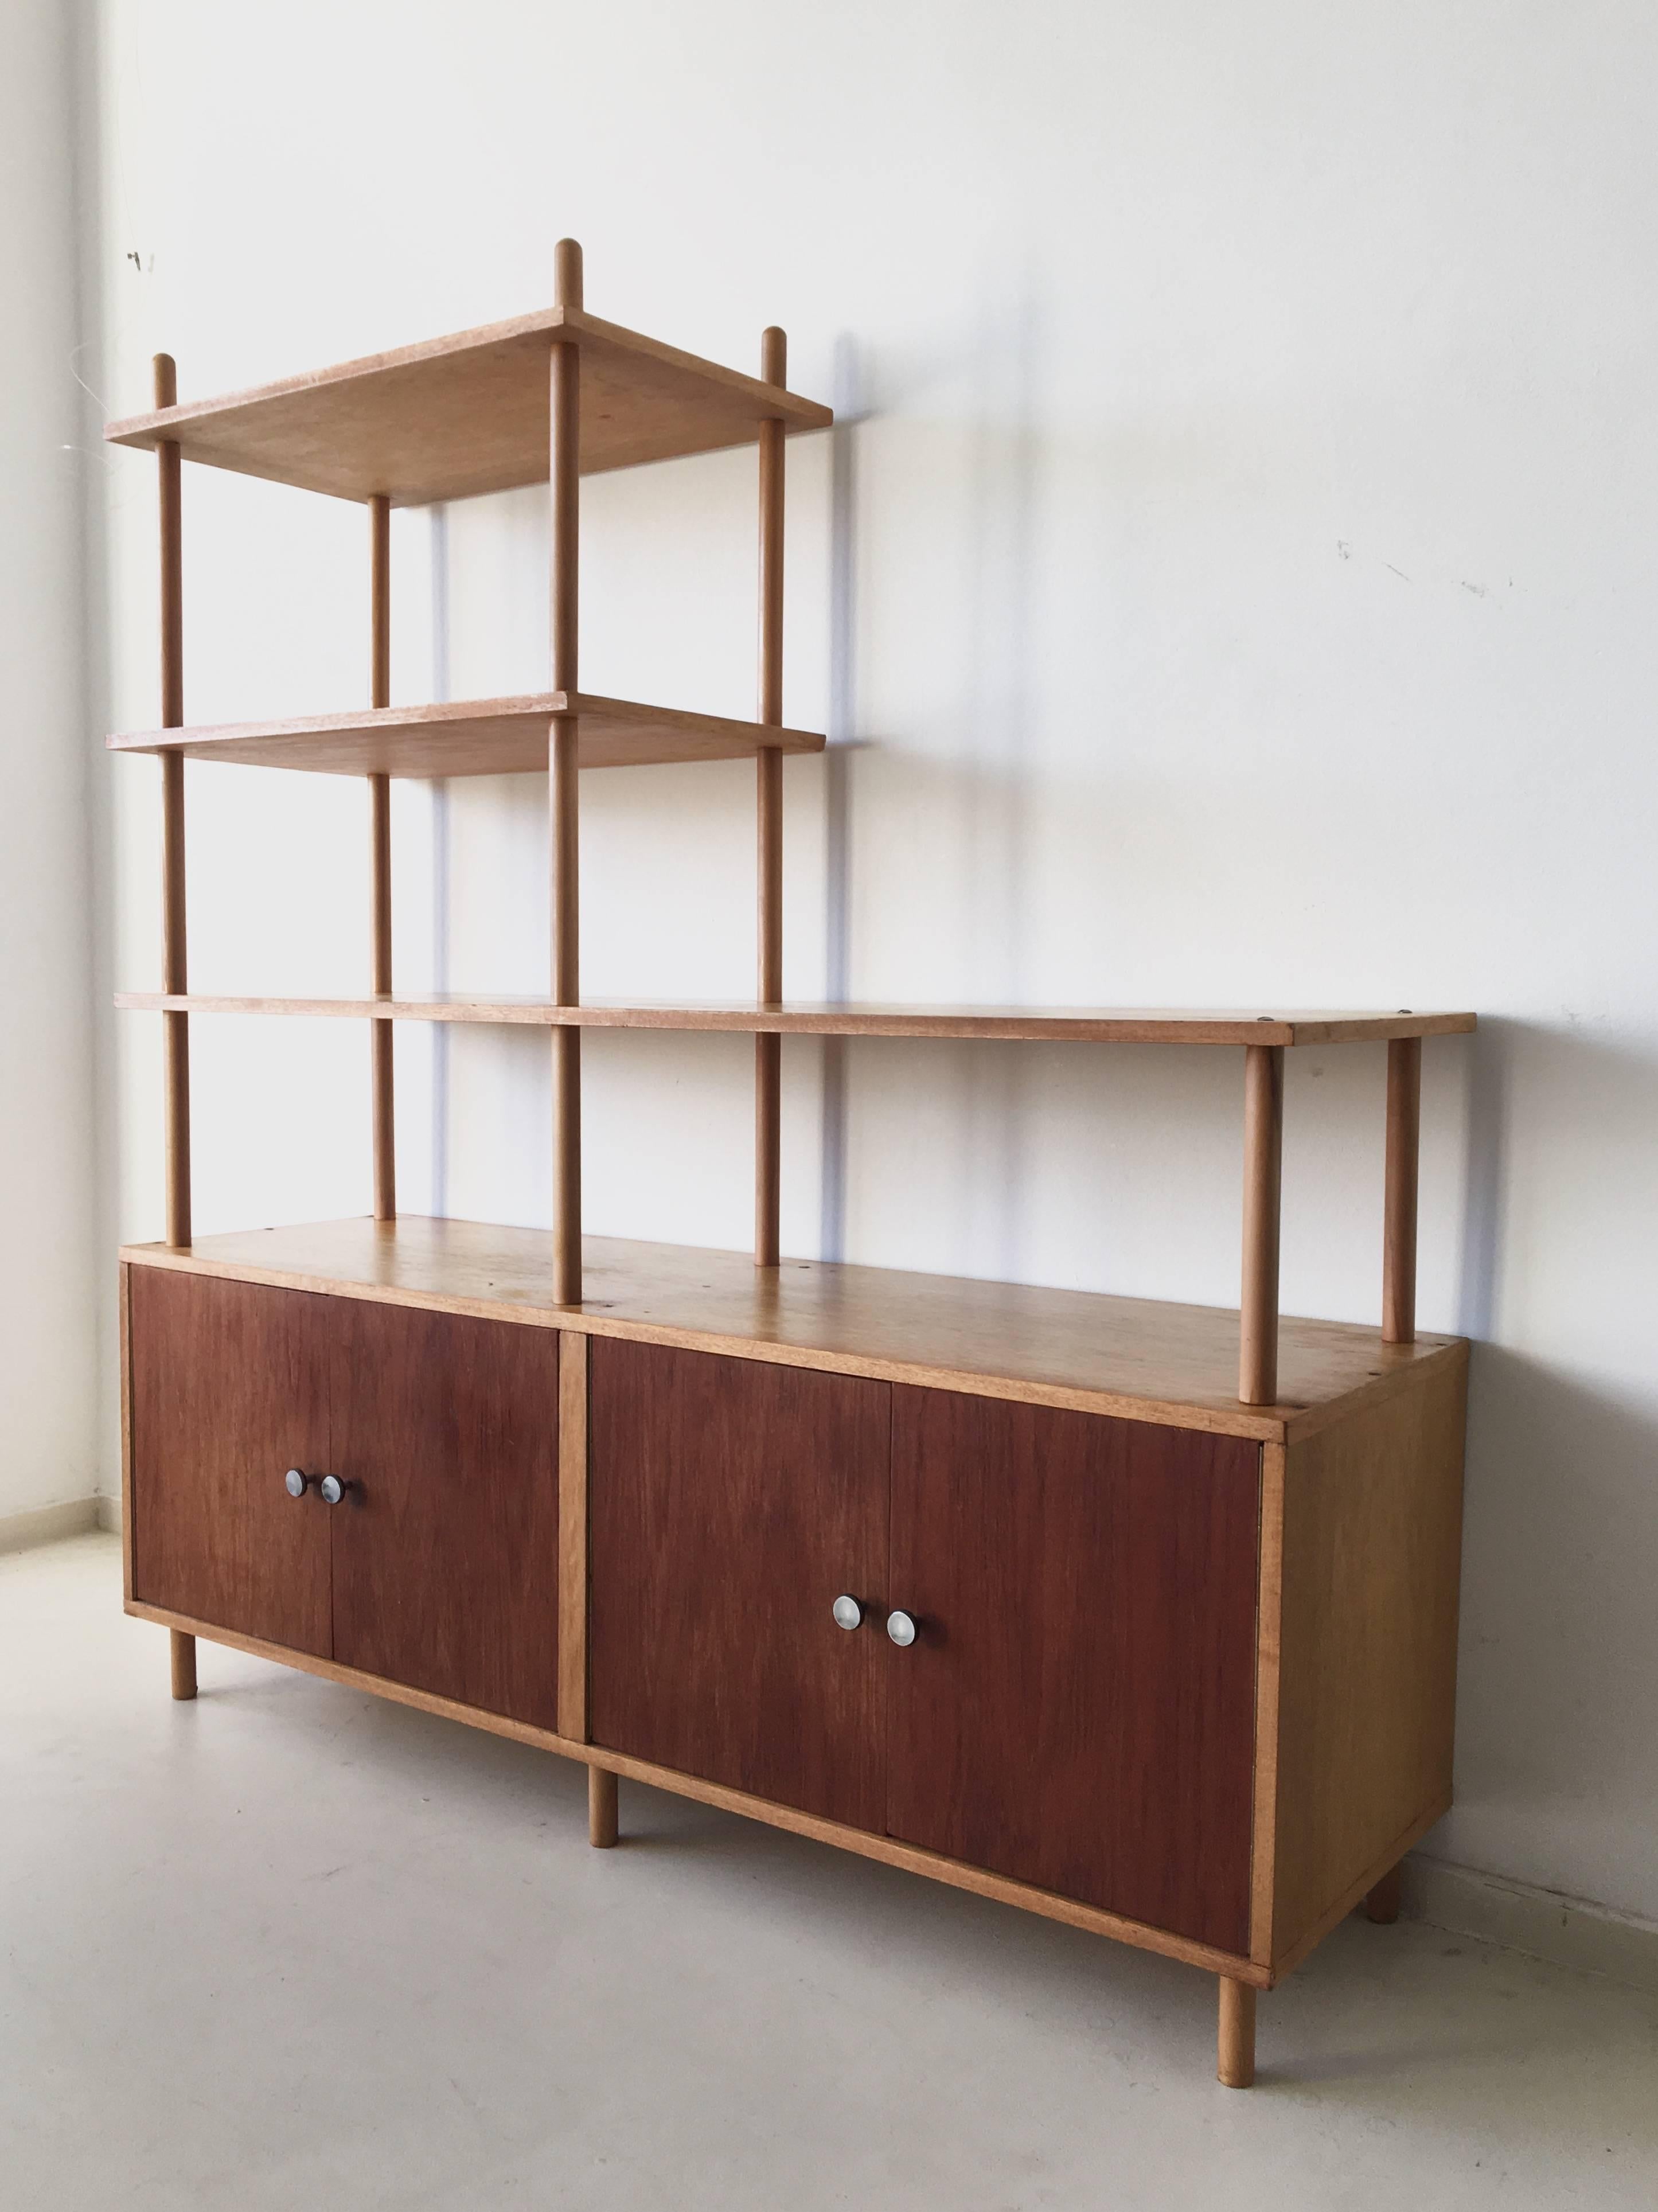 This Midcentury Dutch bookcase was designed by Willem Lutjens for Gouda den Boer, circa 1950-1960s. Inside the cabinet are some non-original shelves, for extra space.

The wall unit is a made to measure type, so extra wall units, cabinets or